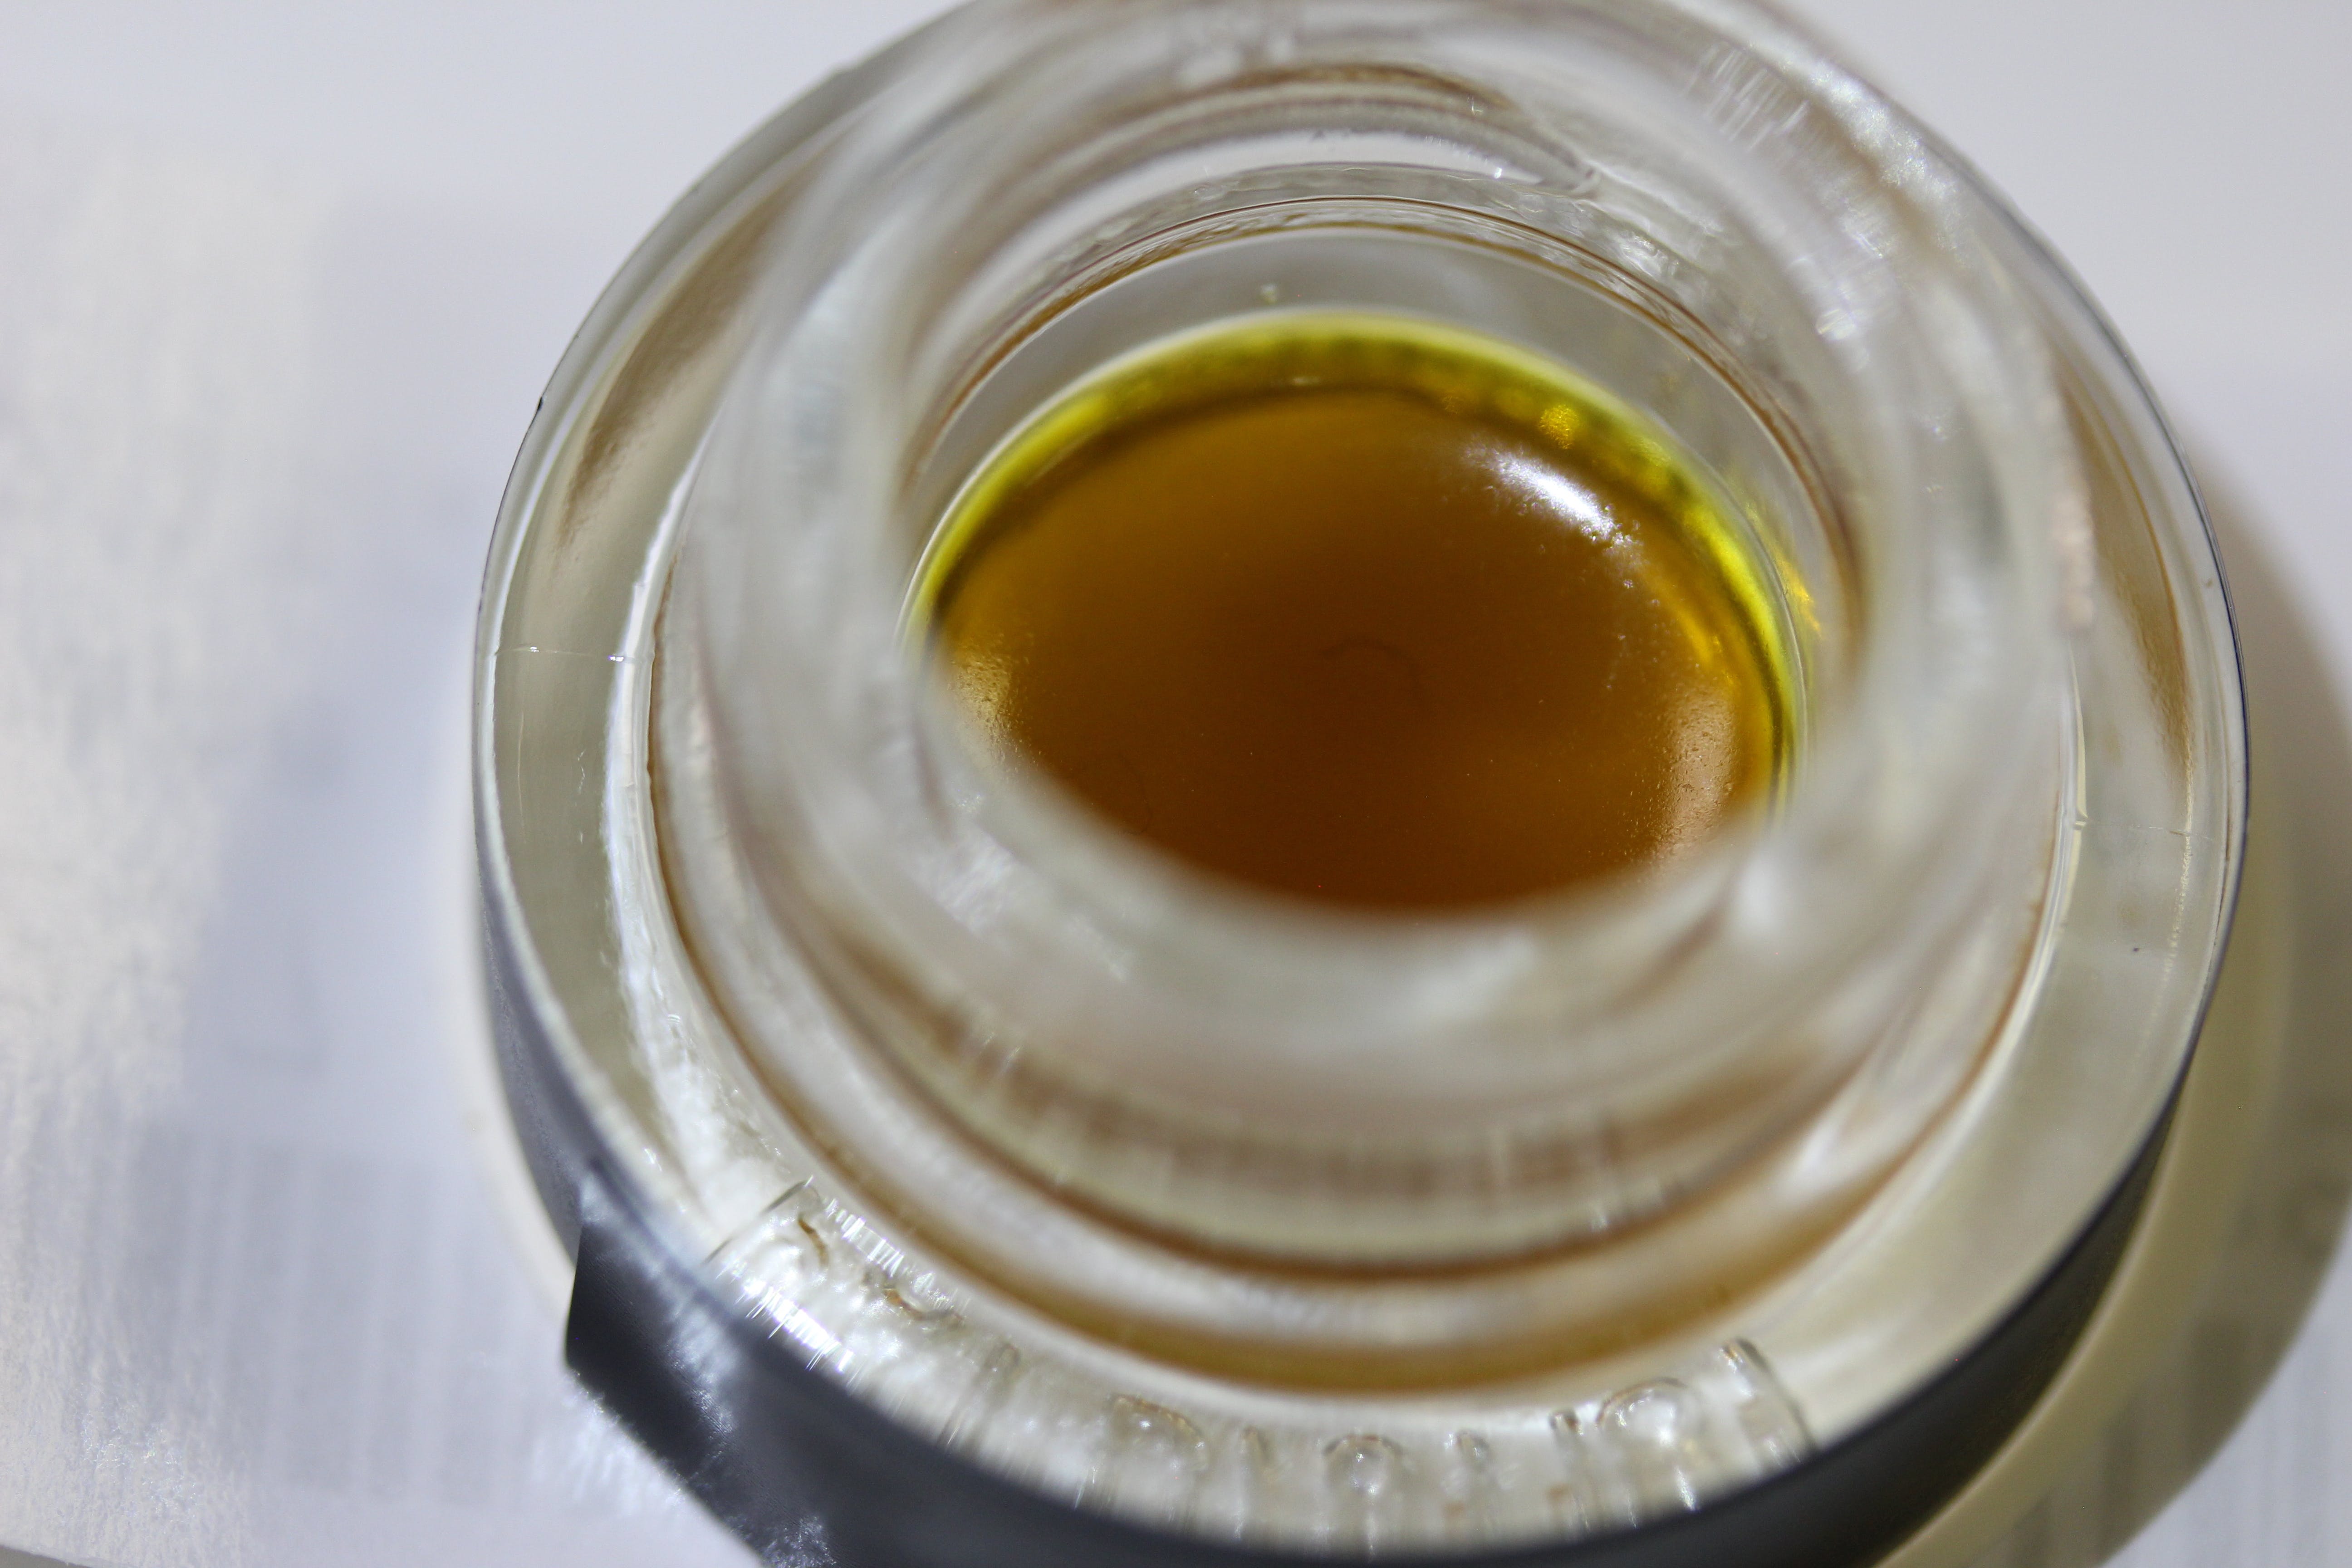 concentrate-green-dot-concentrates